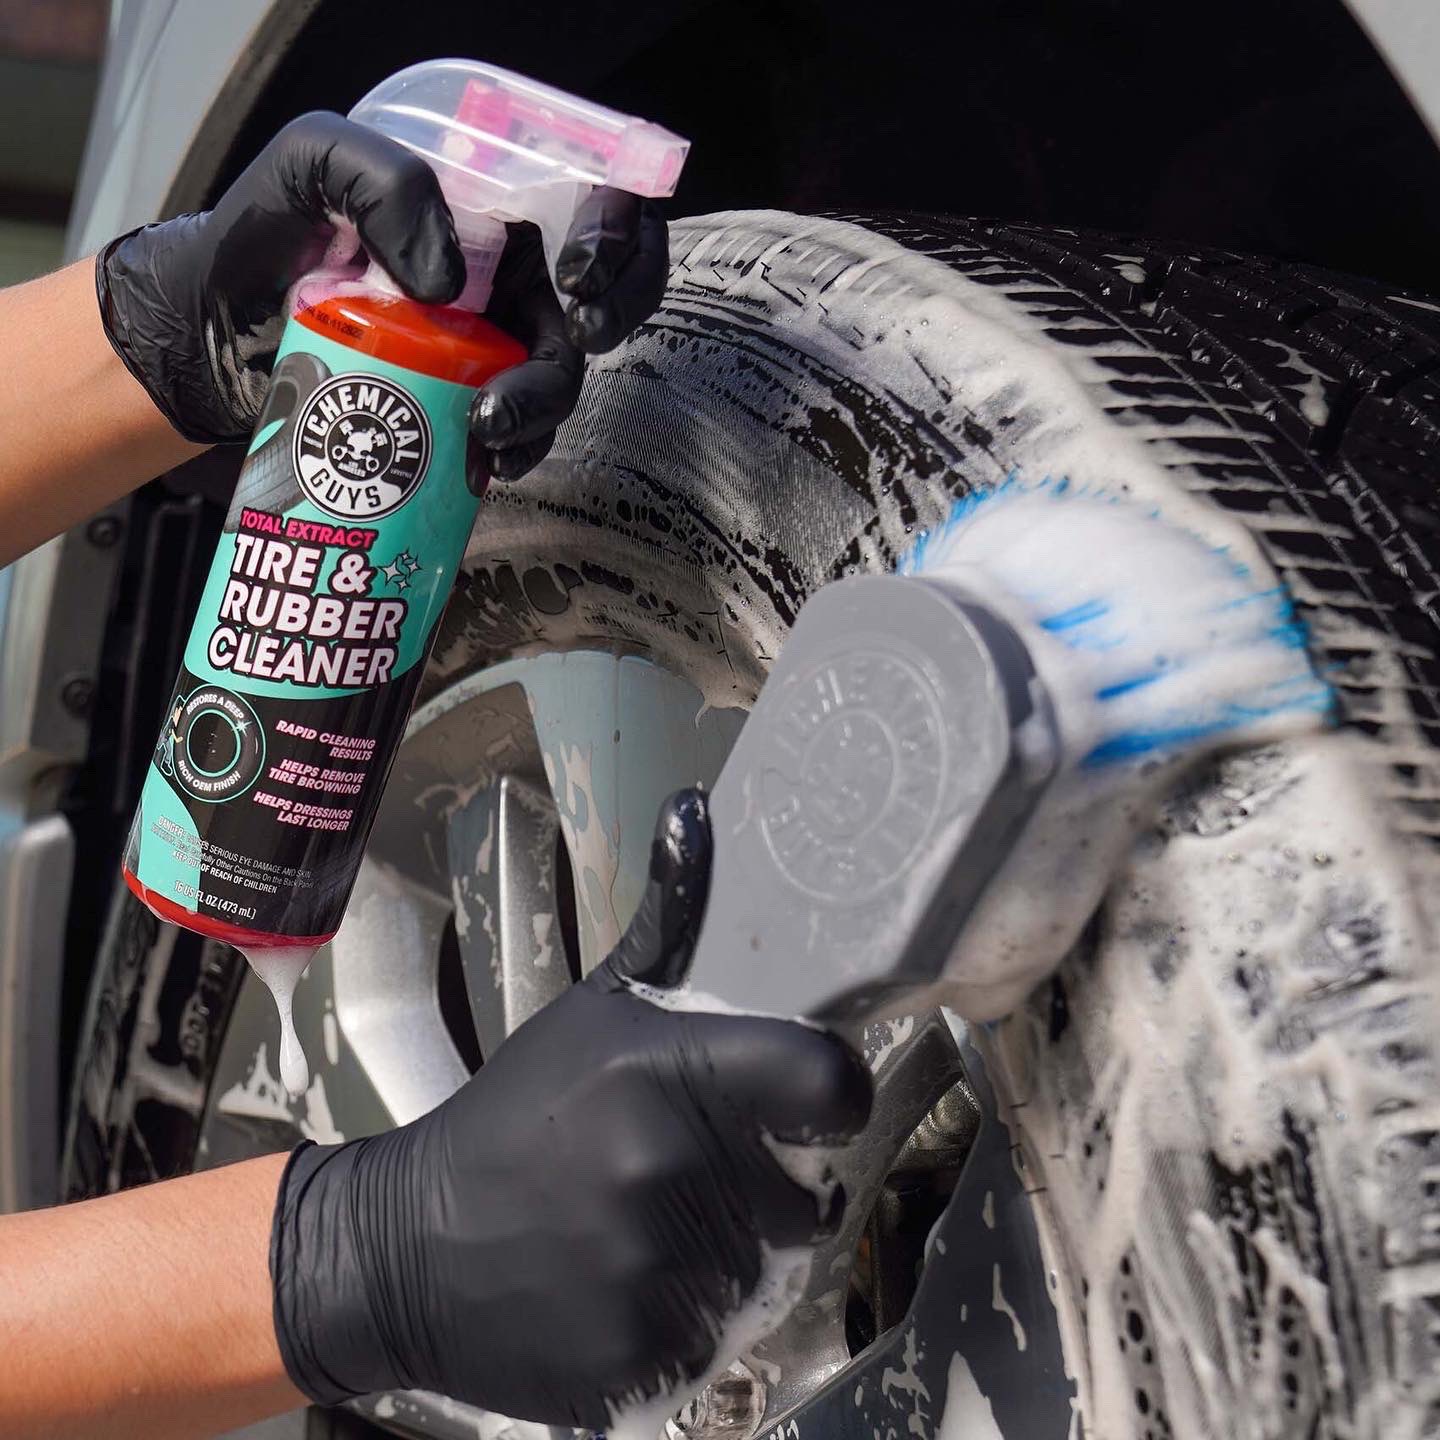 Chemical Guys - Clean, restore, and protect your rubber